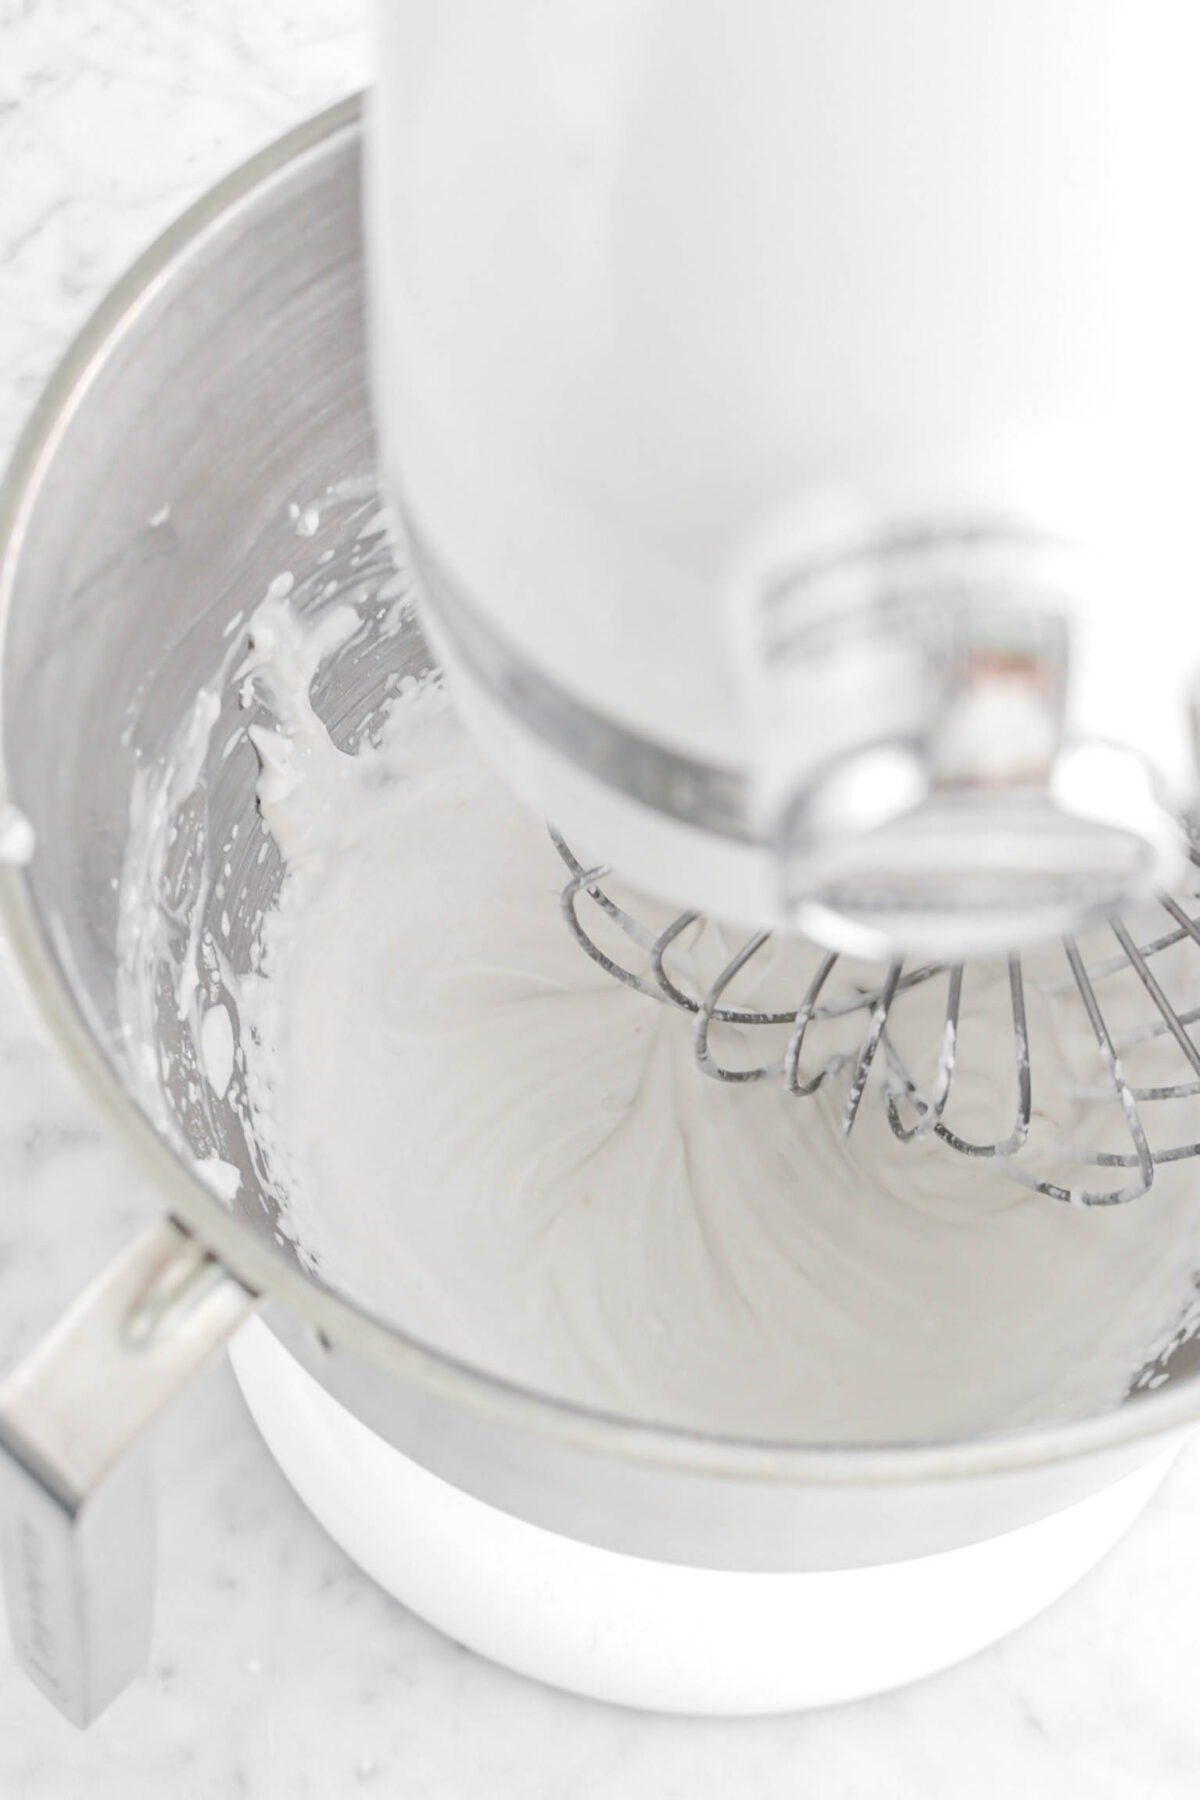 whipped cream in stand mixer